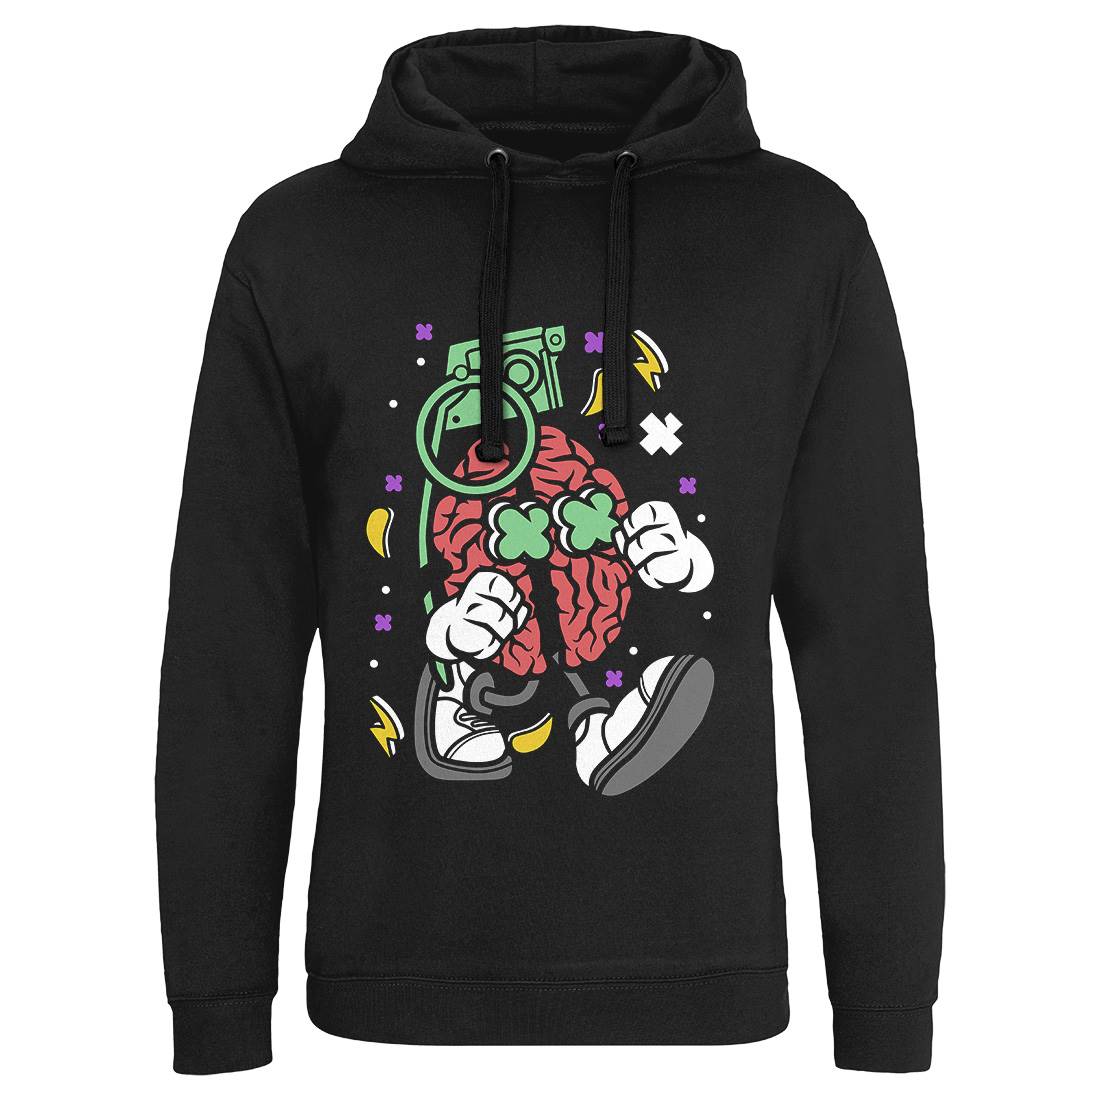 Grenade Brain Mens Hoodie Without Pocket Army C555